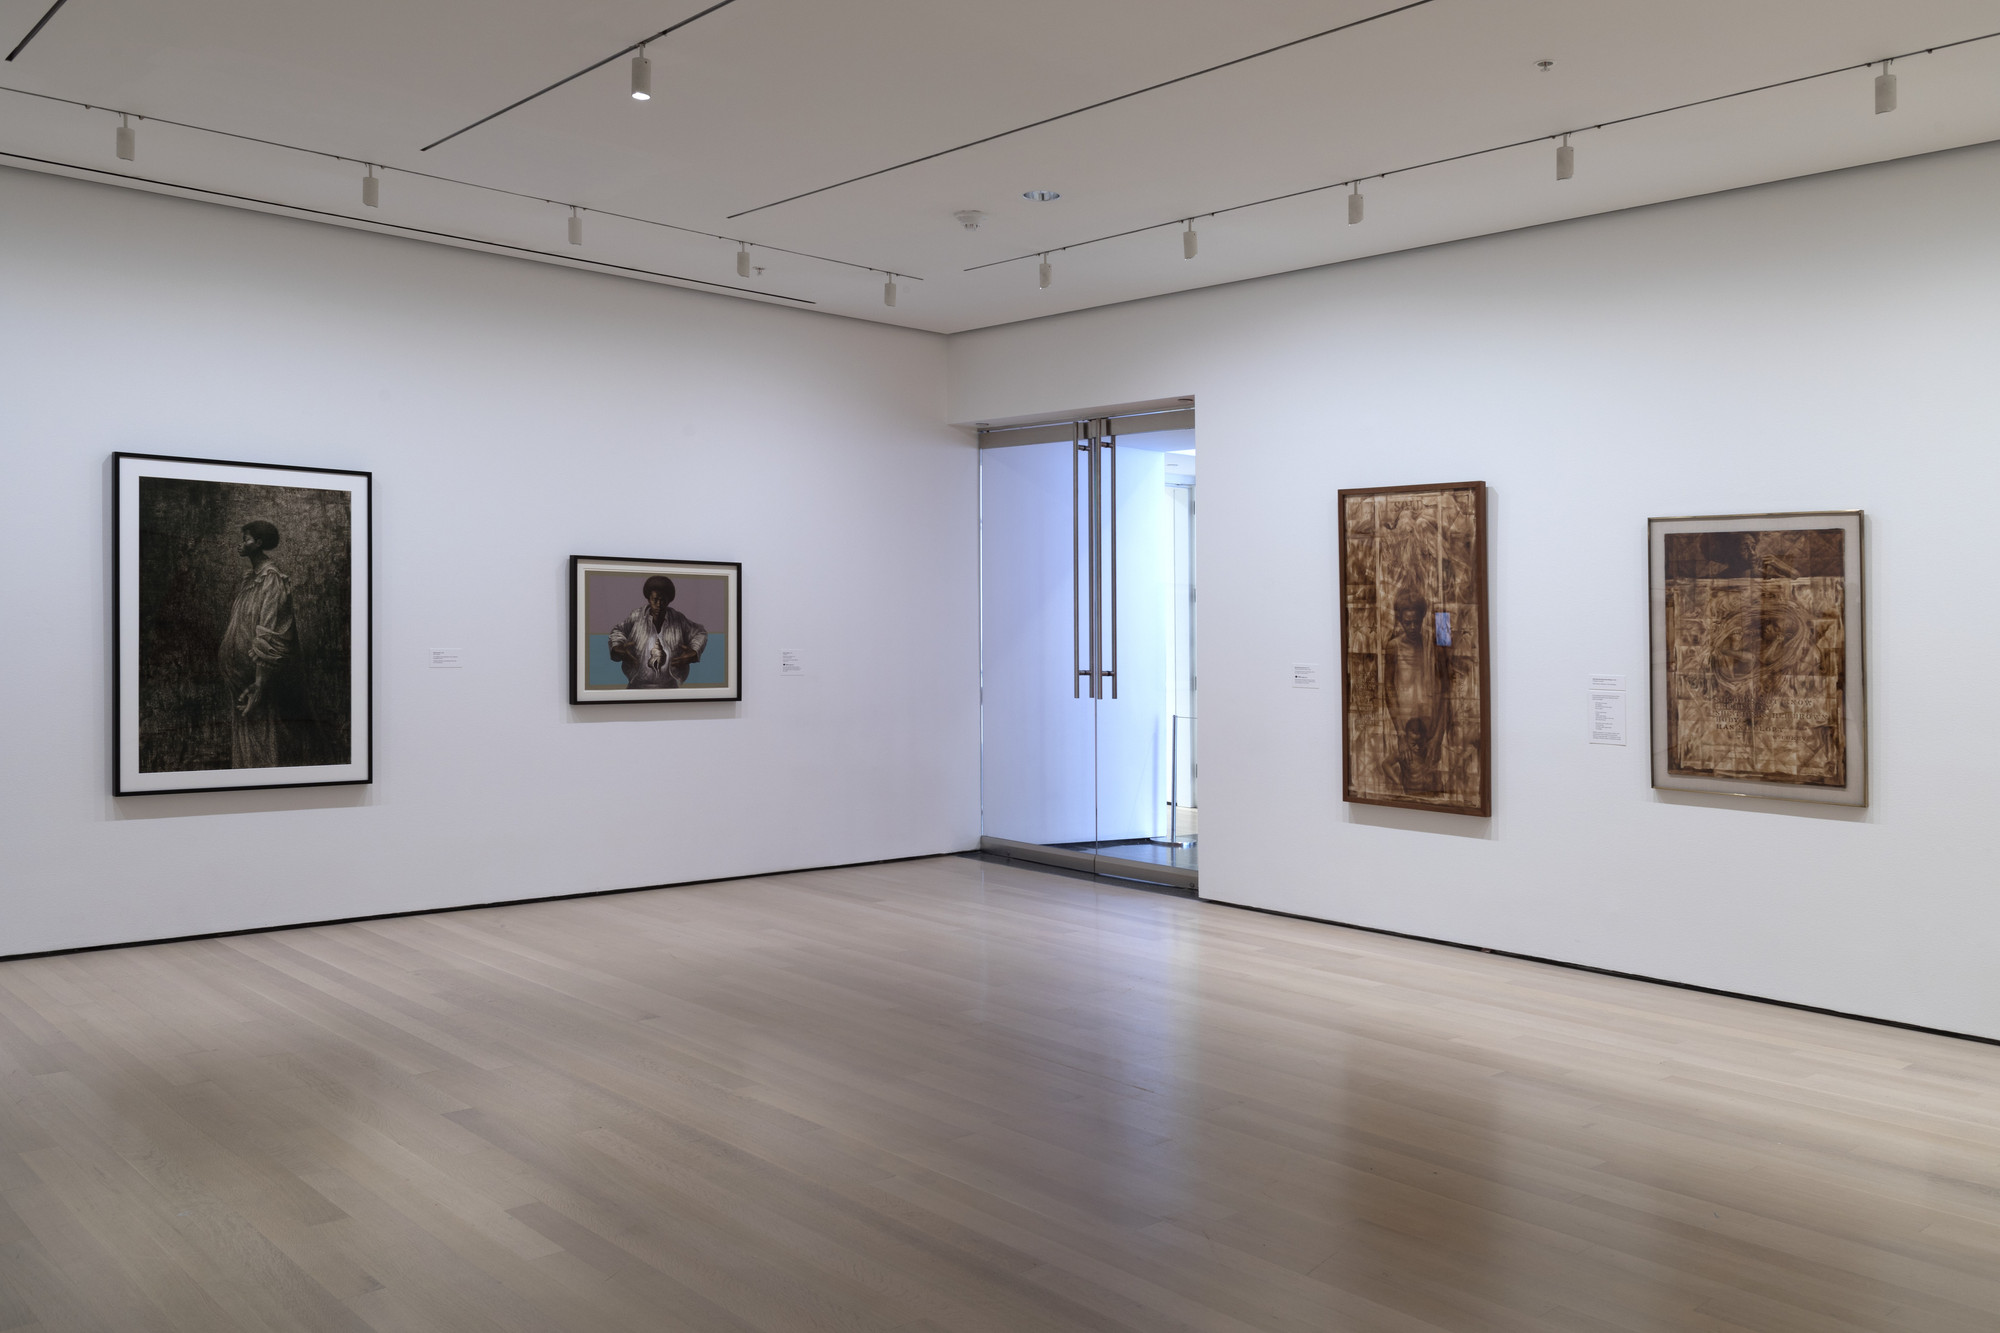 Installation view of the exhibition, "Charles White: A Retrospective" |